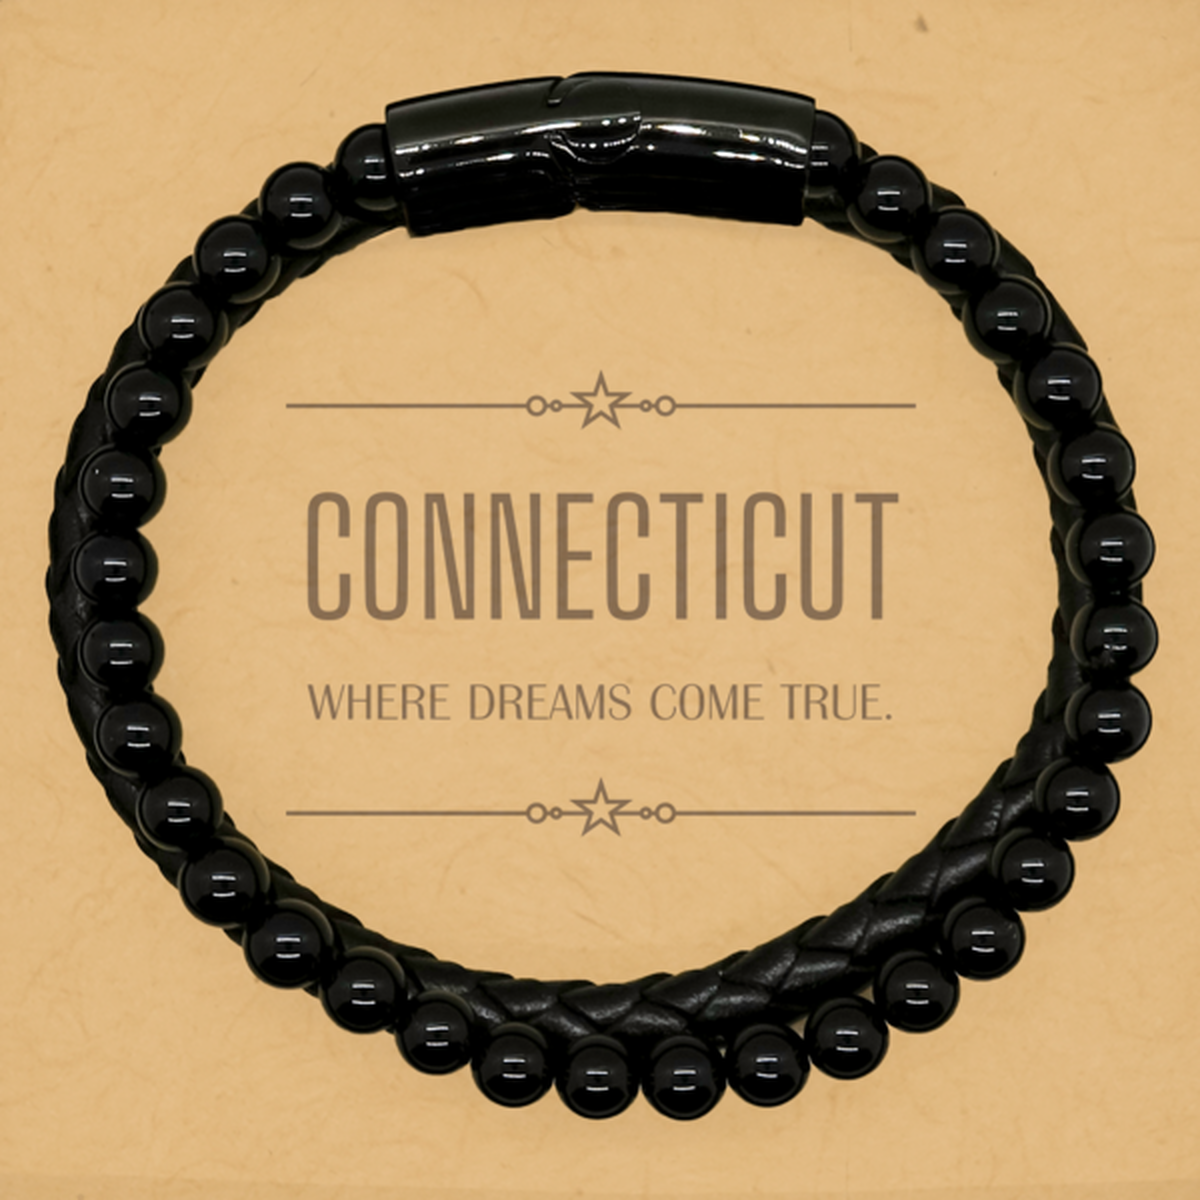 Love Connecticut State Stone Leather Bracelets, Connecticut Where dreams come true, Birthday Inspirational Gifts For Connecticut Men, Women, Friends